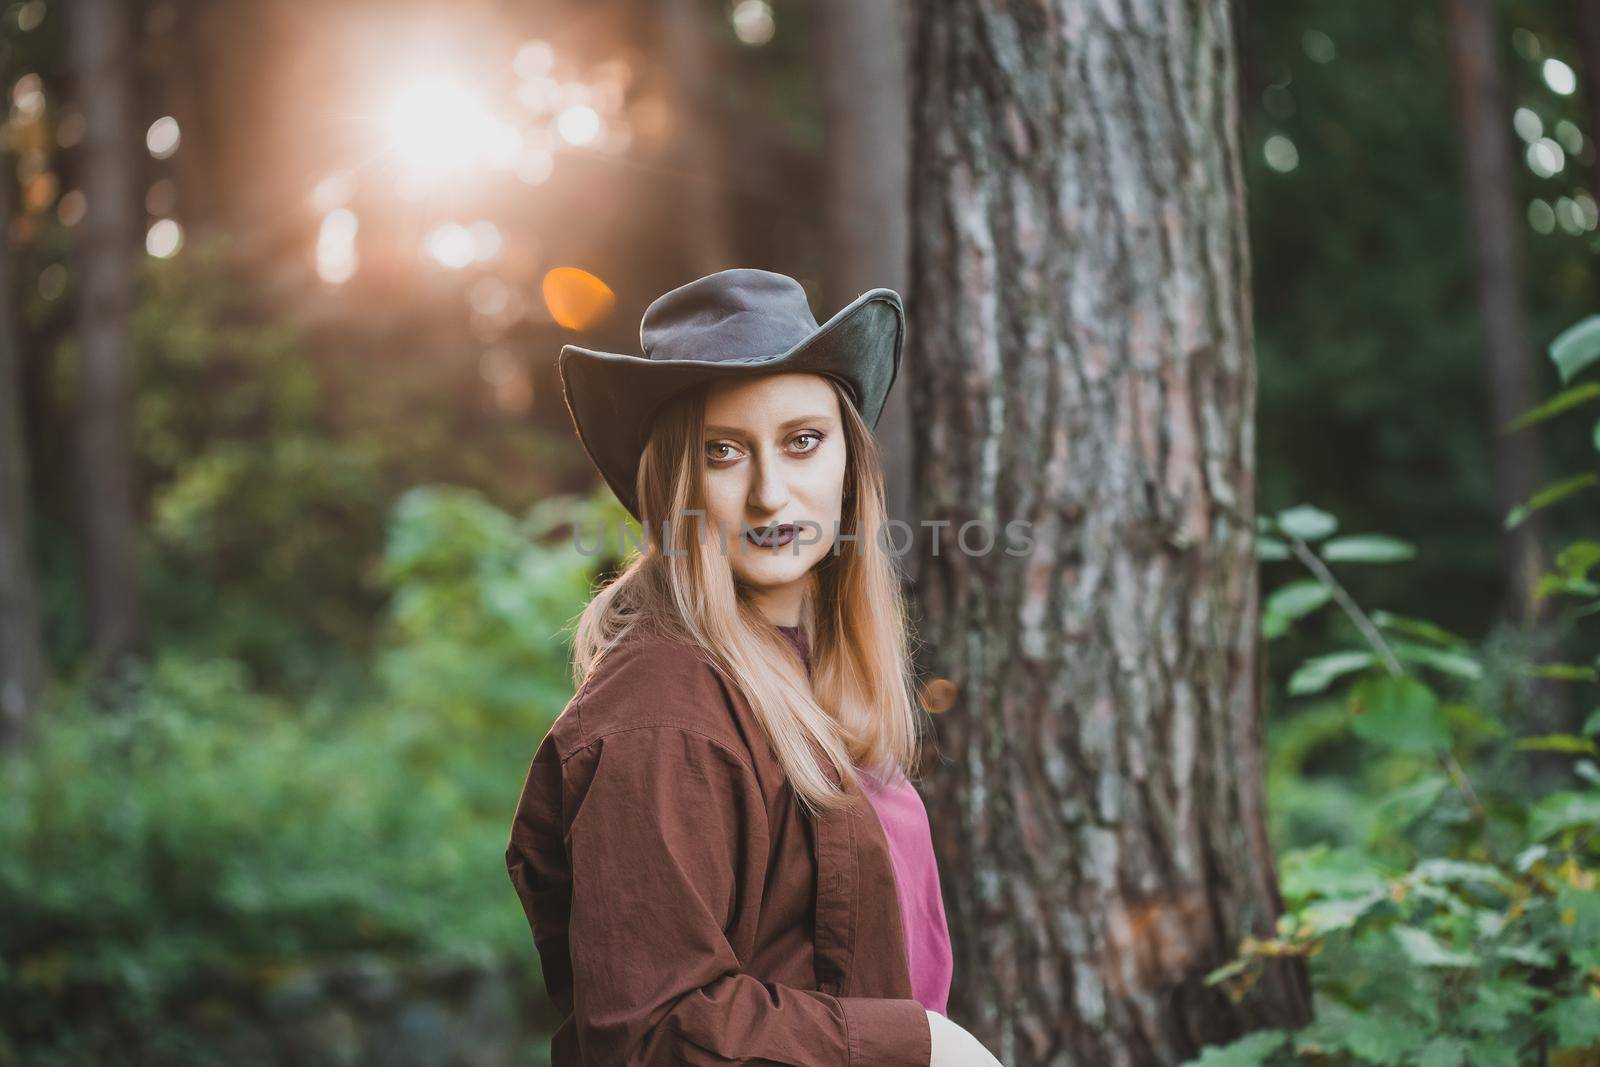 Blond woman wearing cowboy hat and brown shirt by Syvanych